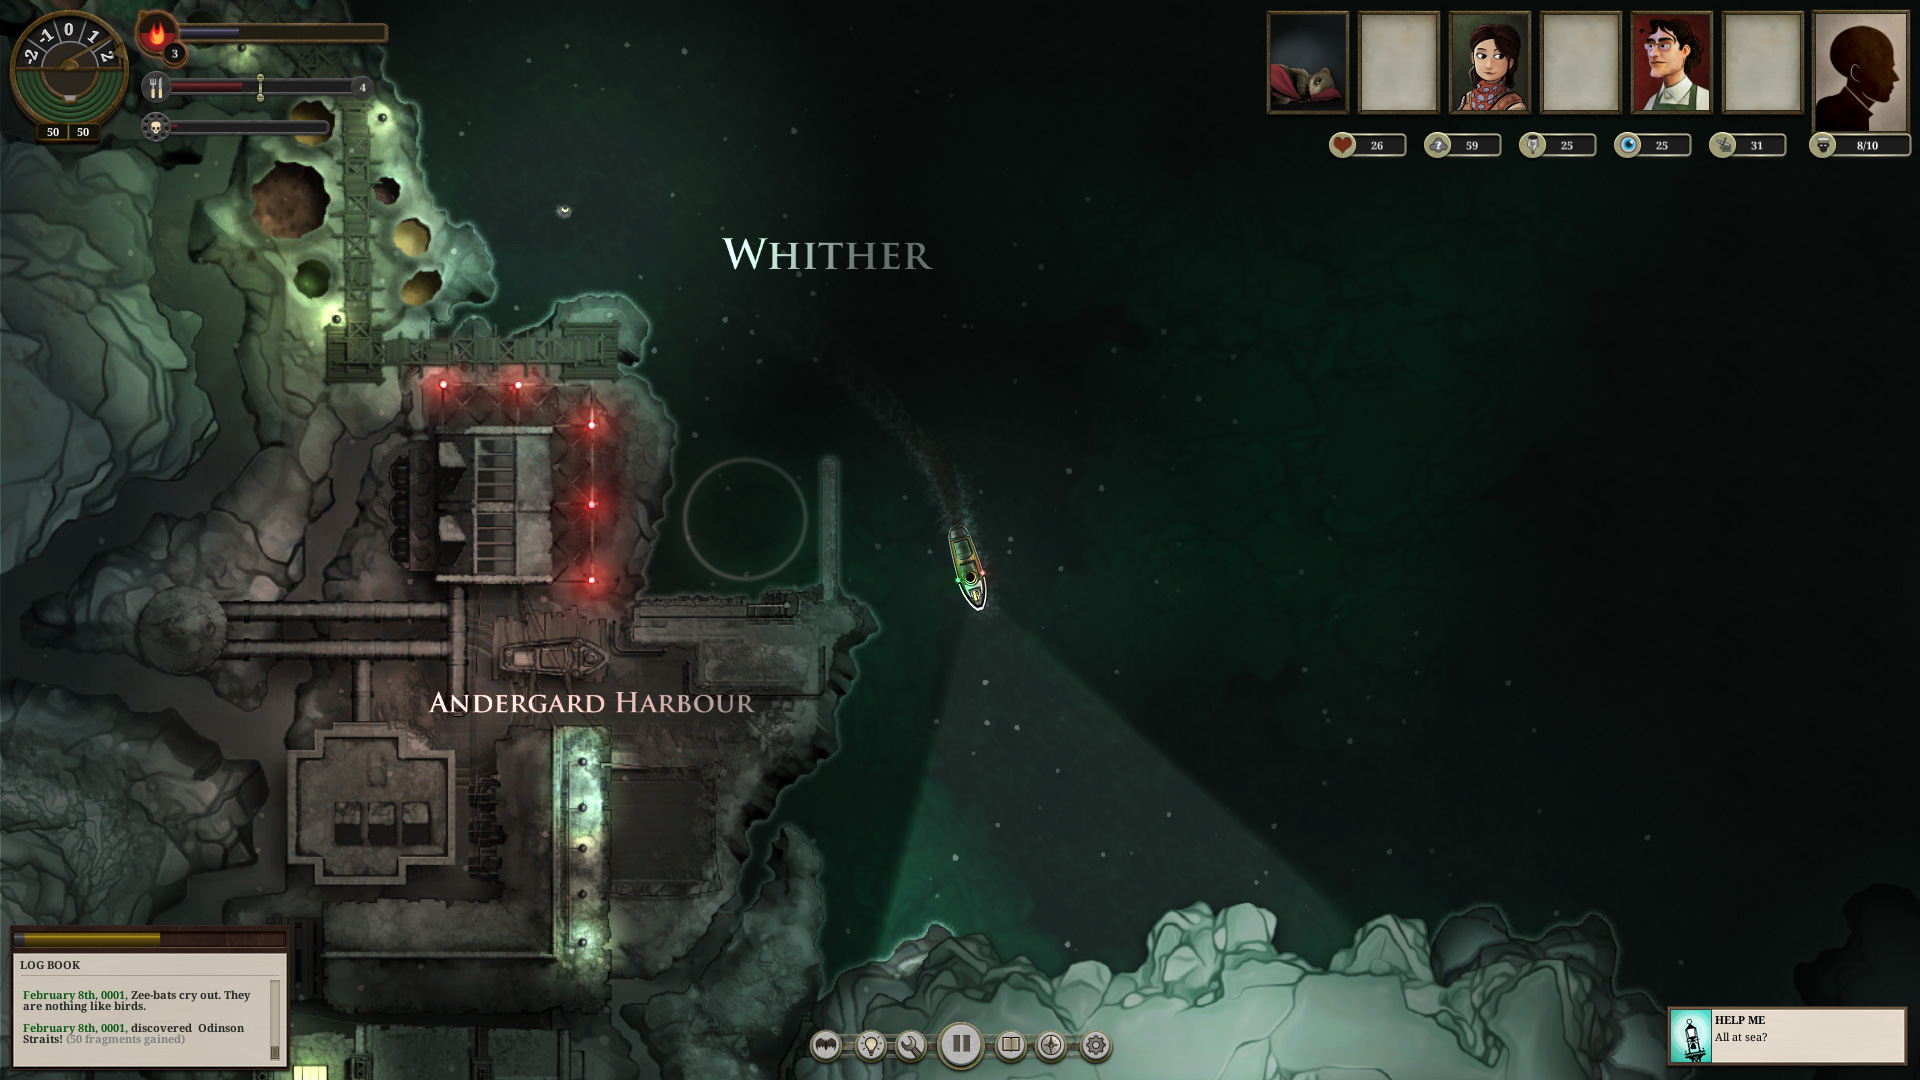 SUNLESS SEA PC Game Latest Version Free Download